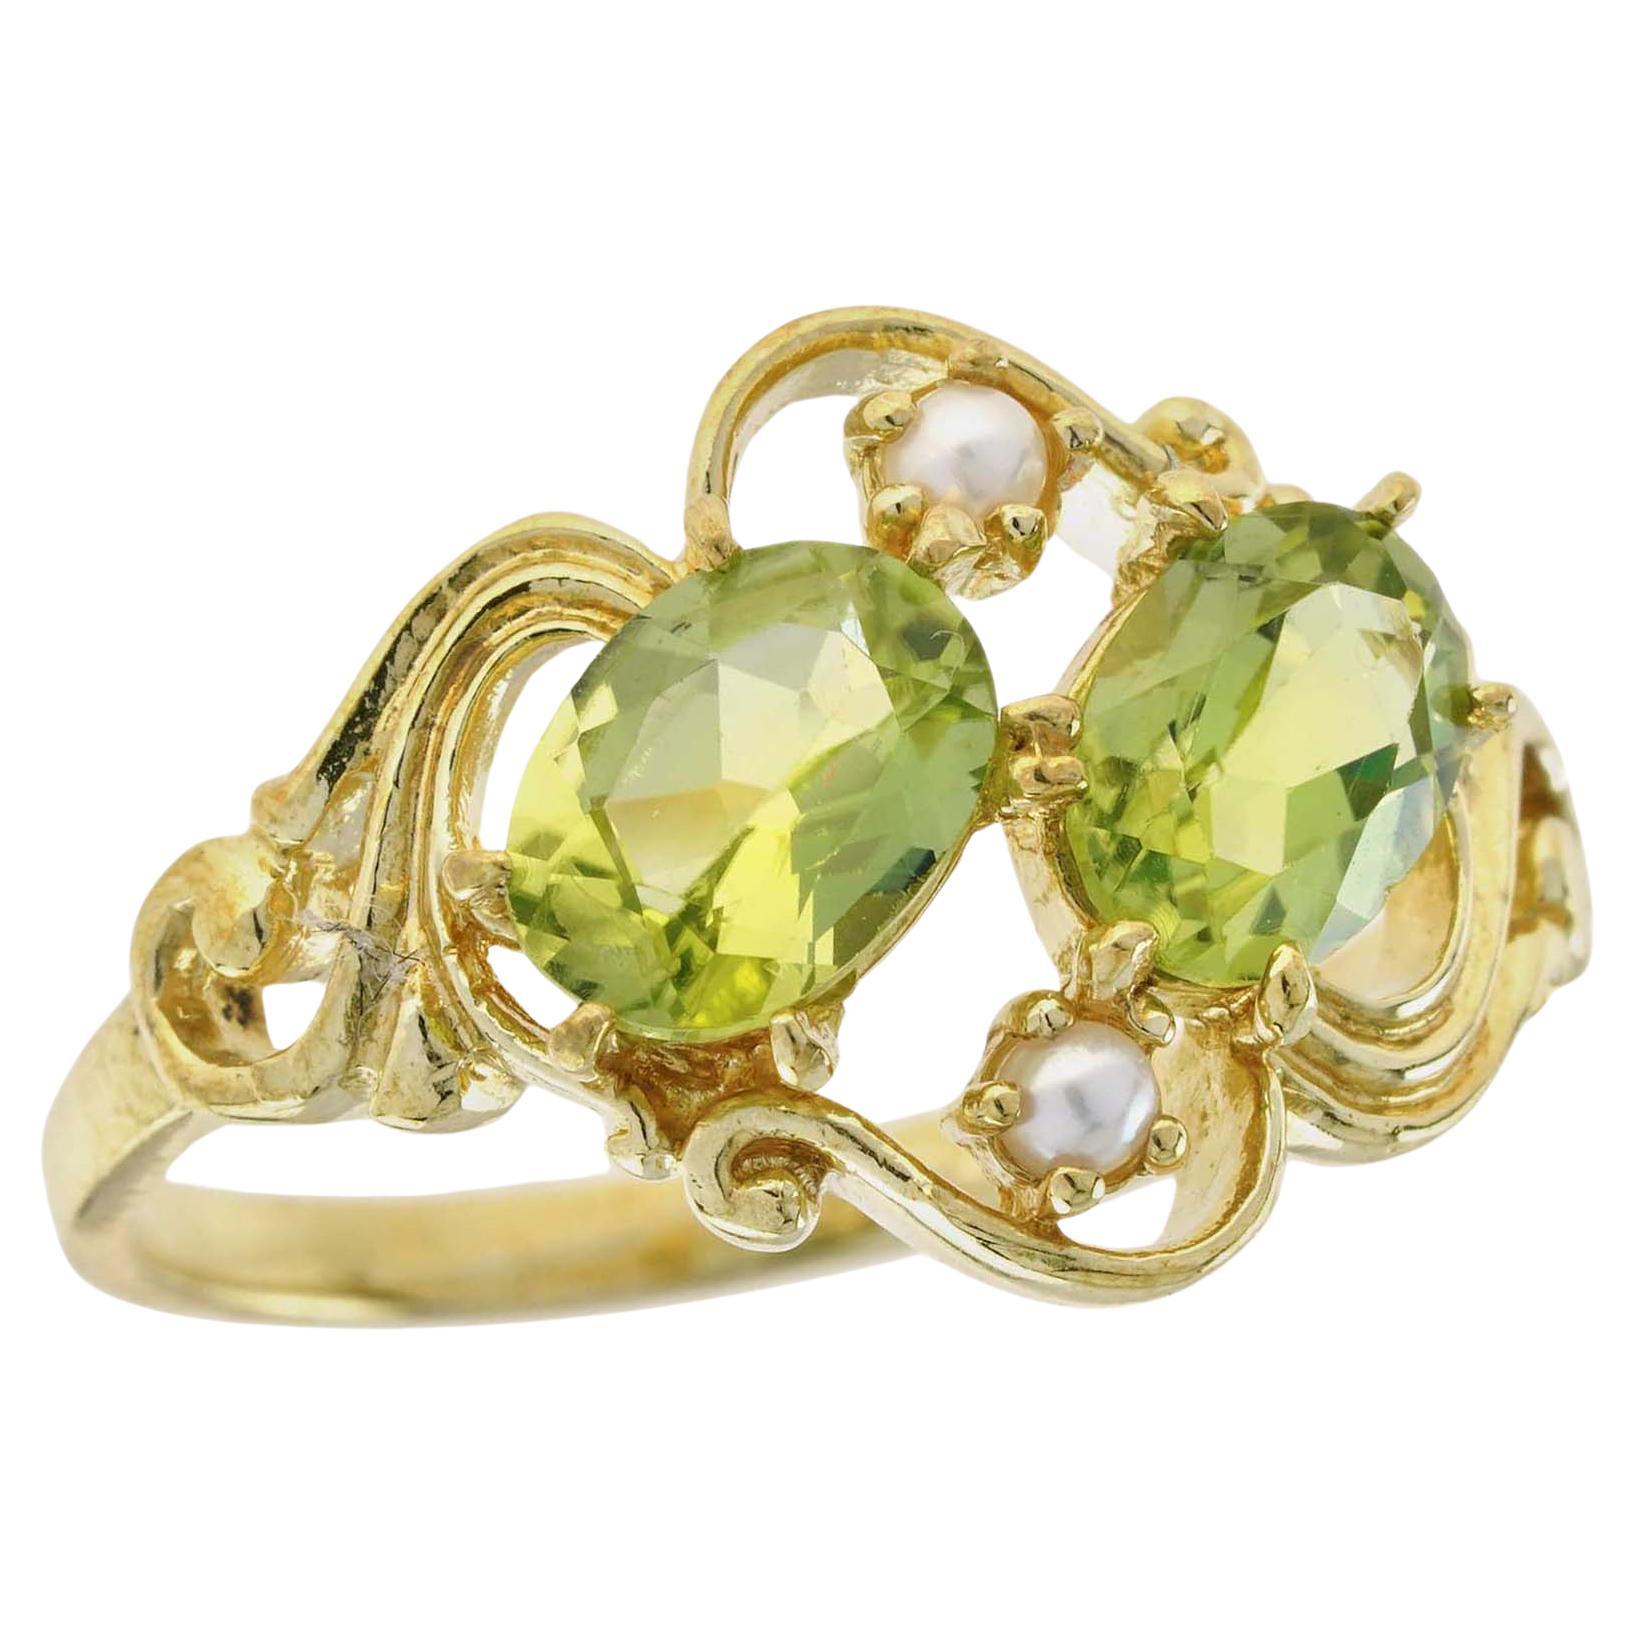 For Sale:  Natural Peridot and Pearl Vintage Style Duo Cluster Ring in Solid 9K Yellow Gold